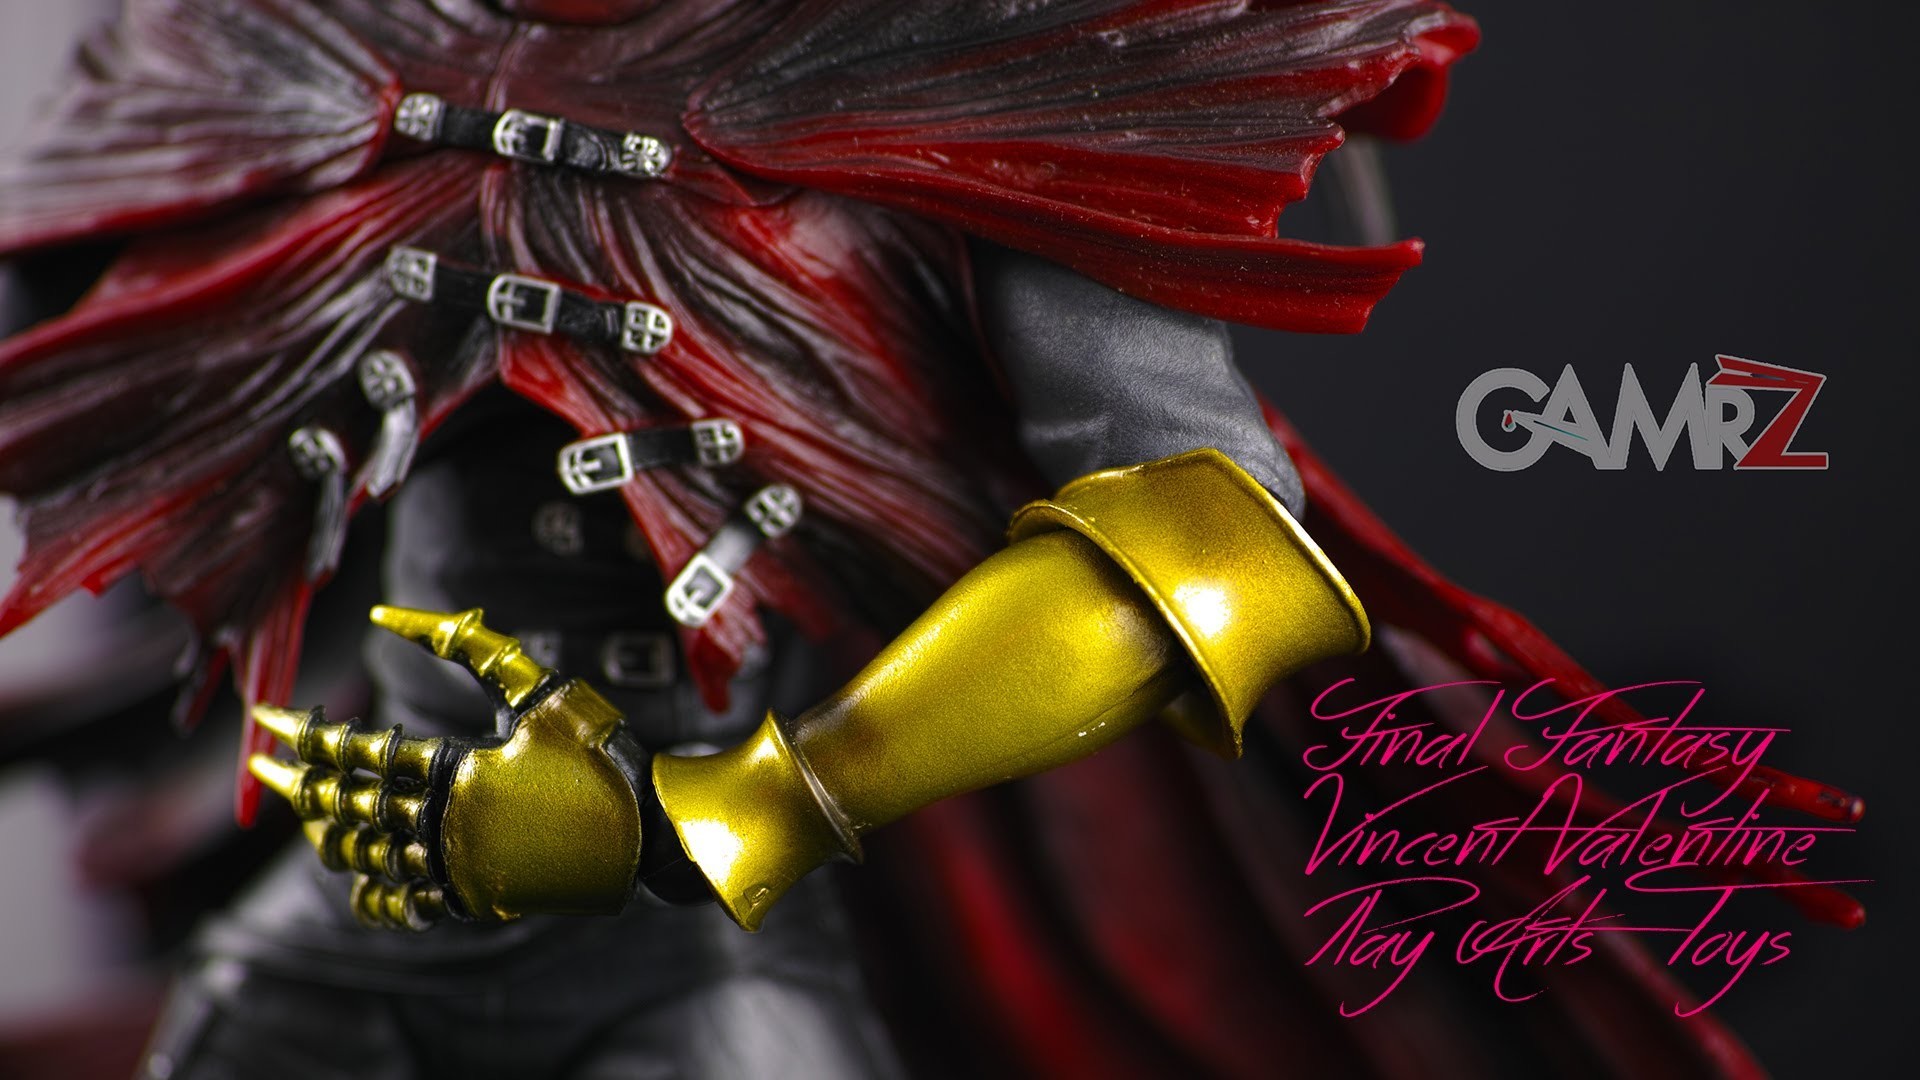 1920x1080 UNBOXING: Final Fantasy VII - Vincent Valentine by Play Arts Kai - YouTube